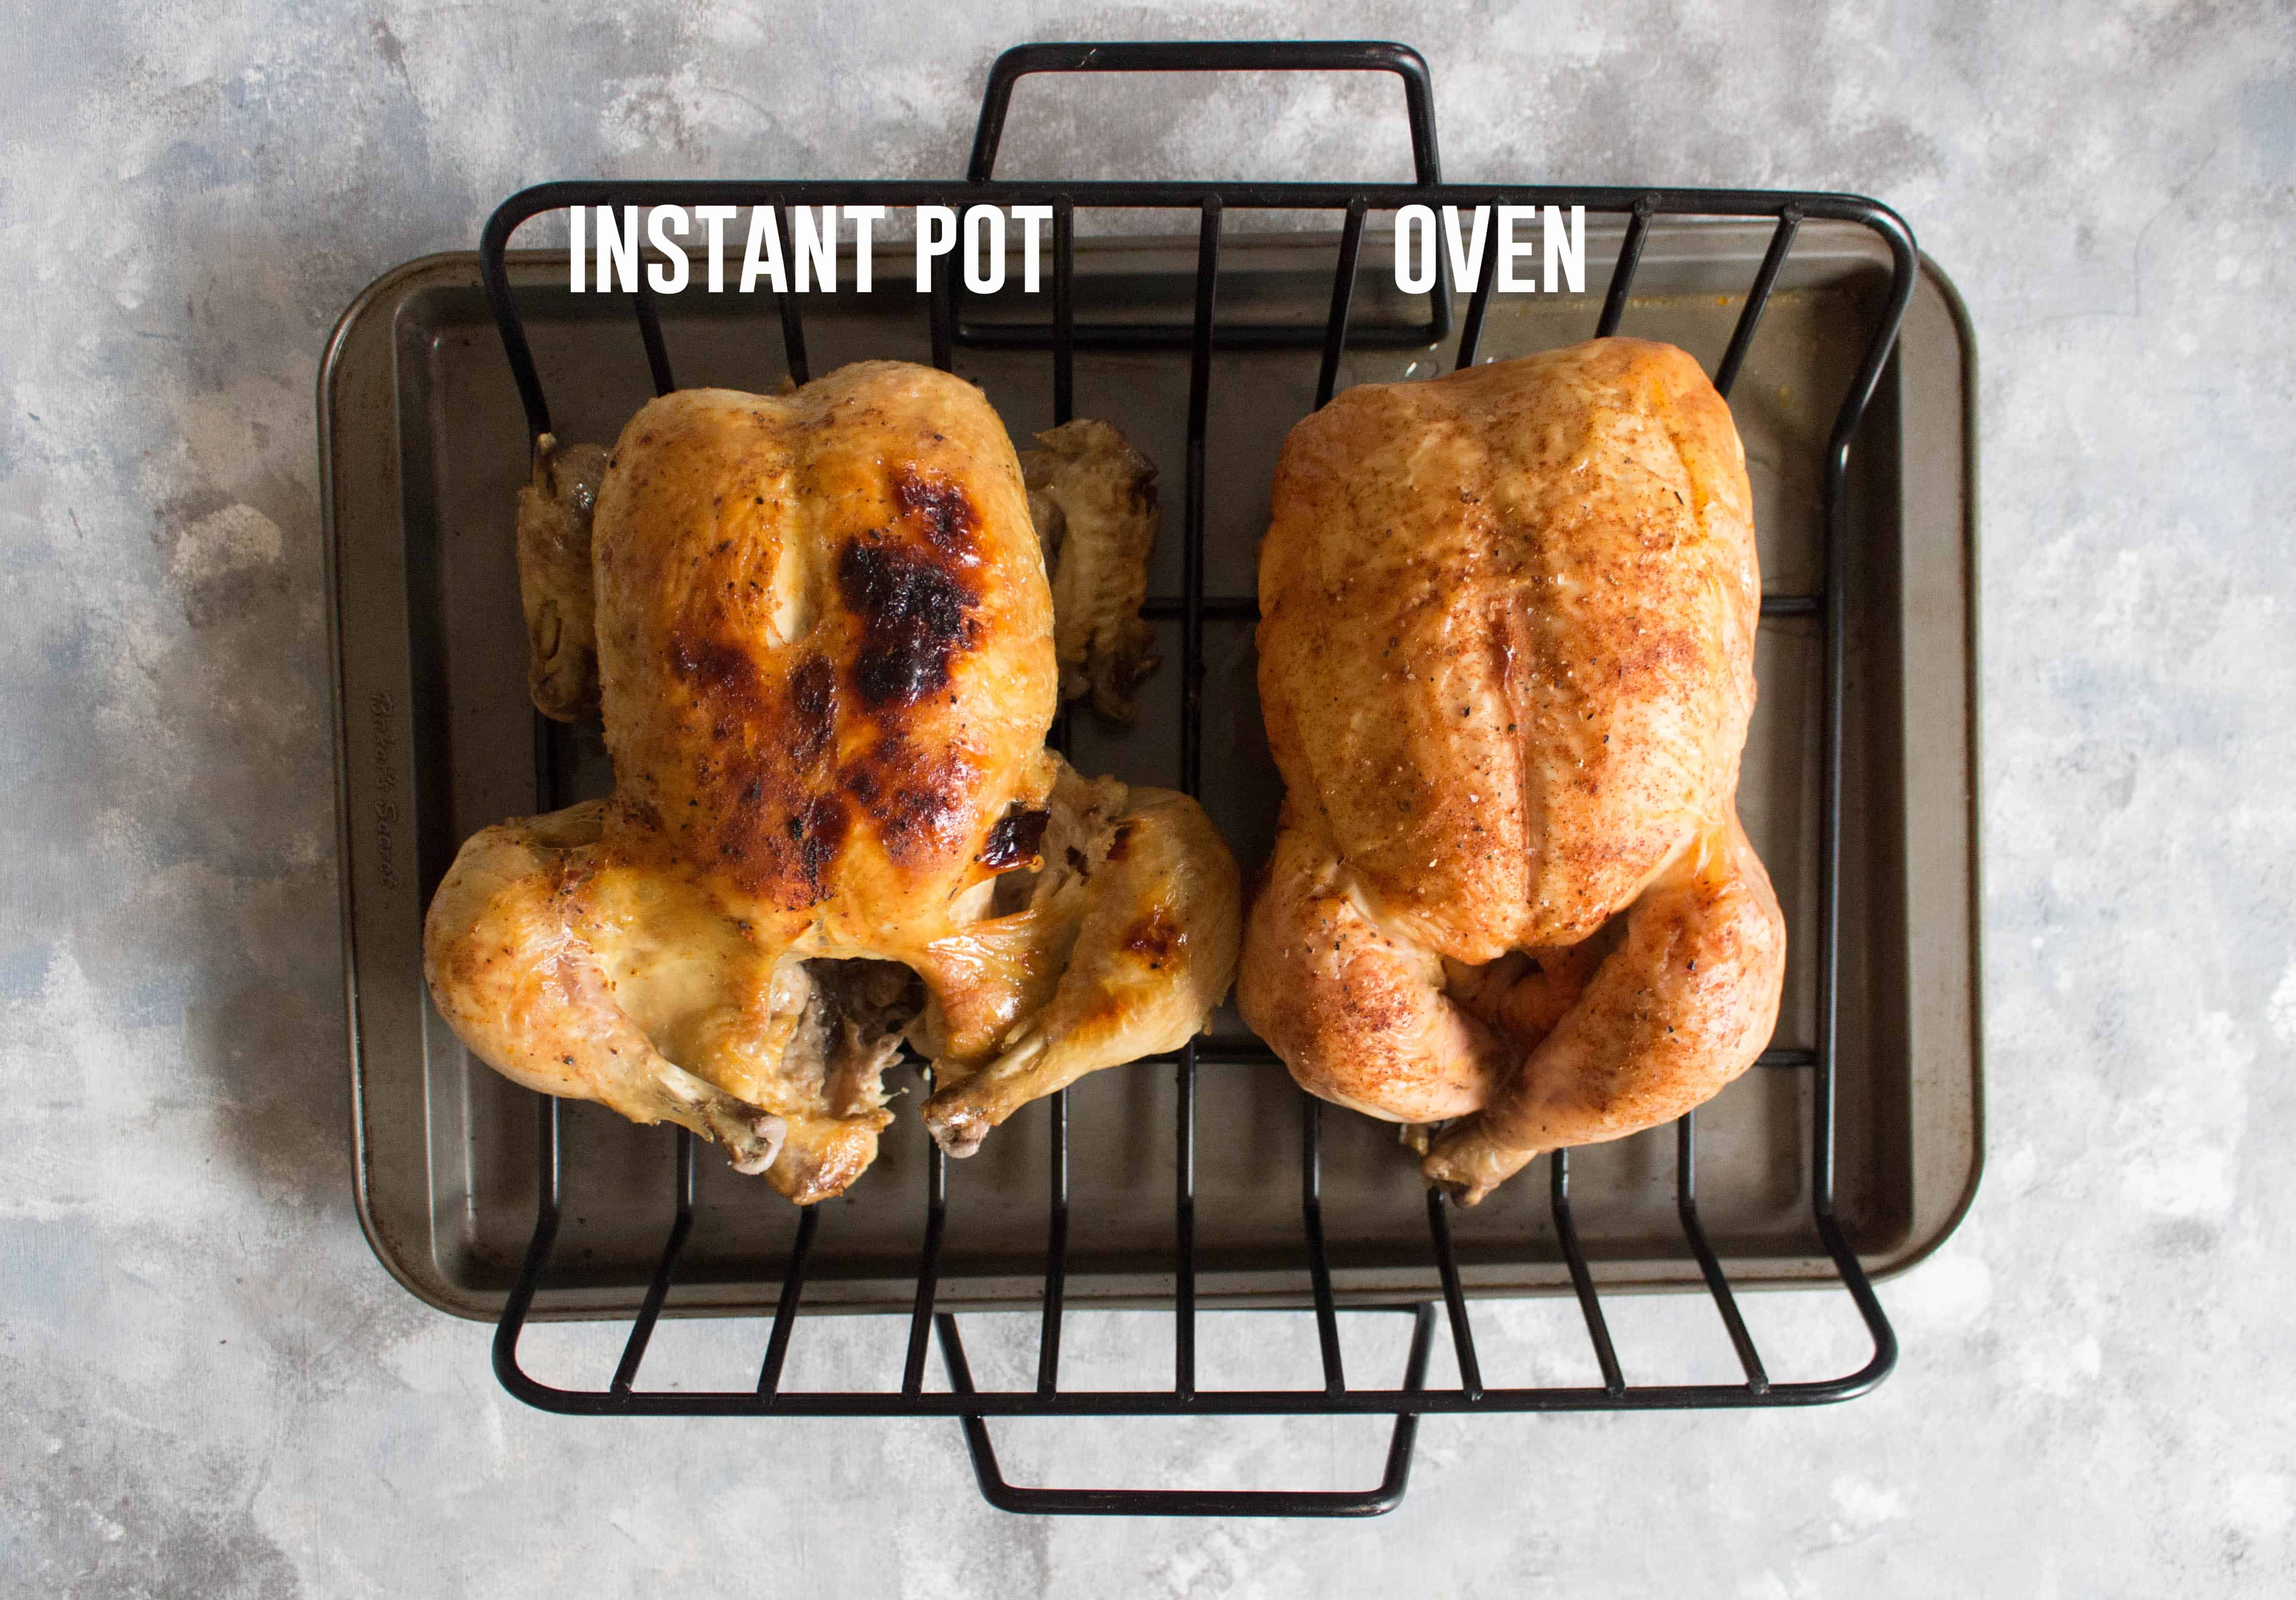 Curious as to how to cook a whole chicken in an Instant Pot? Keep reading to see how you can make a delicious, fall off the bone, and the juiciest whole chicken in an Instant Pot!